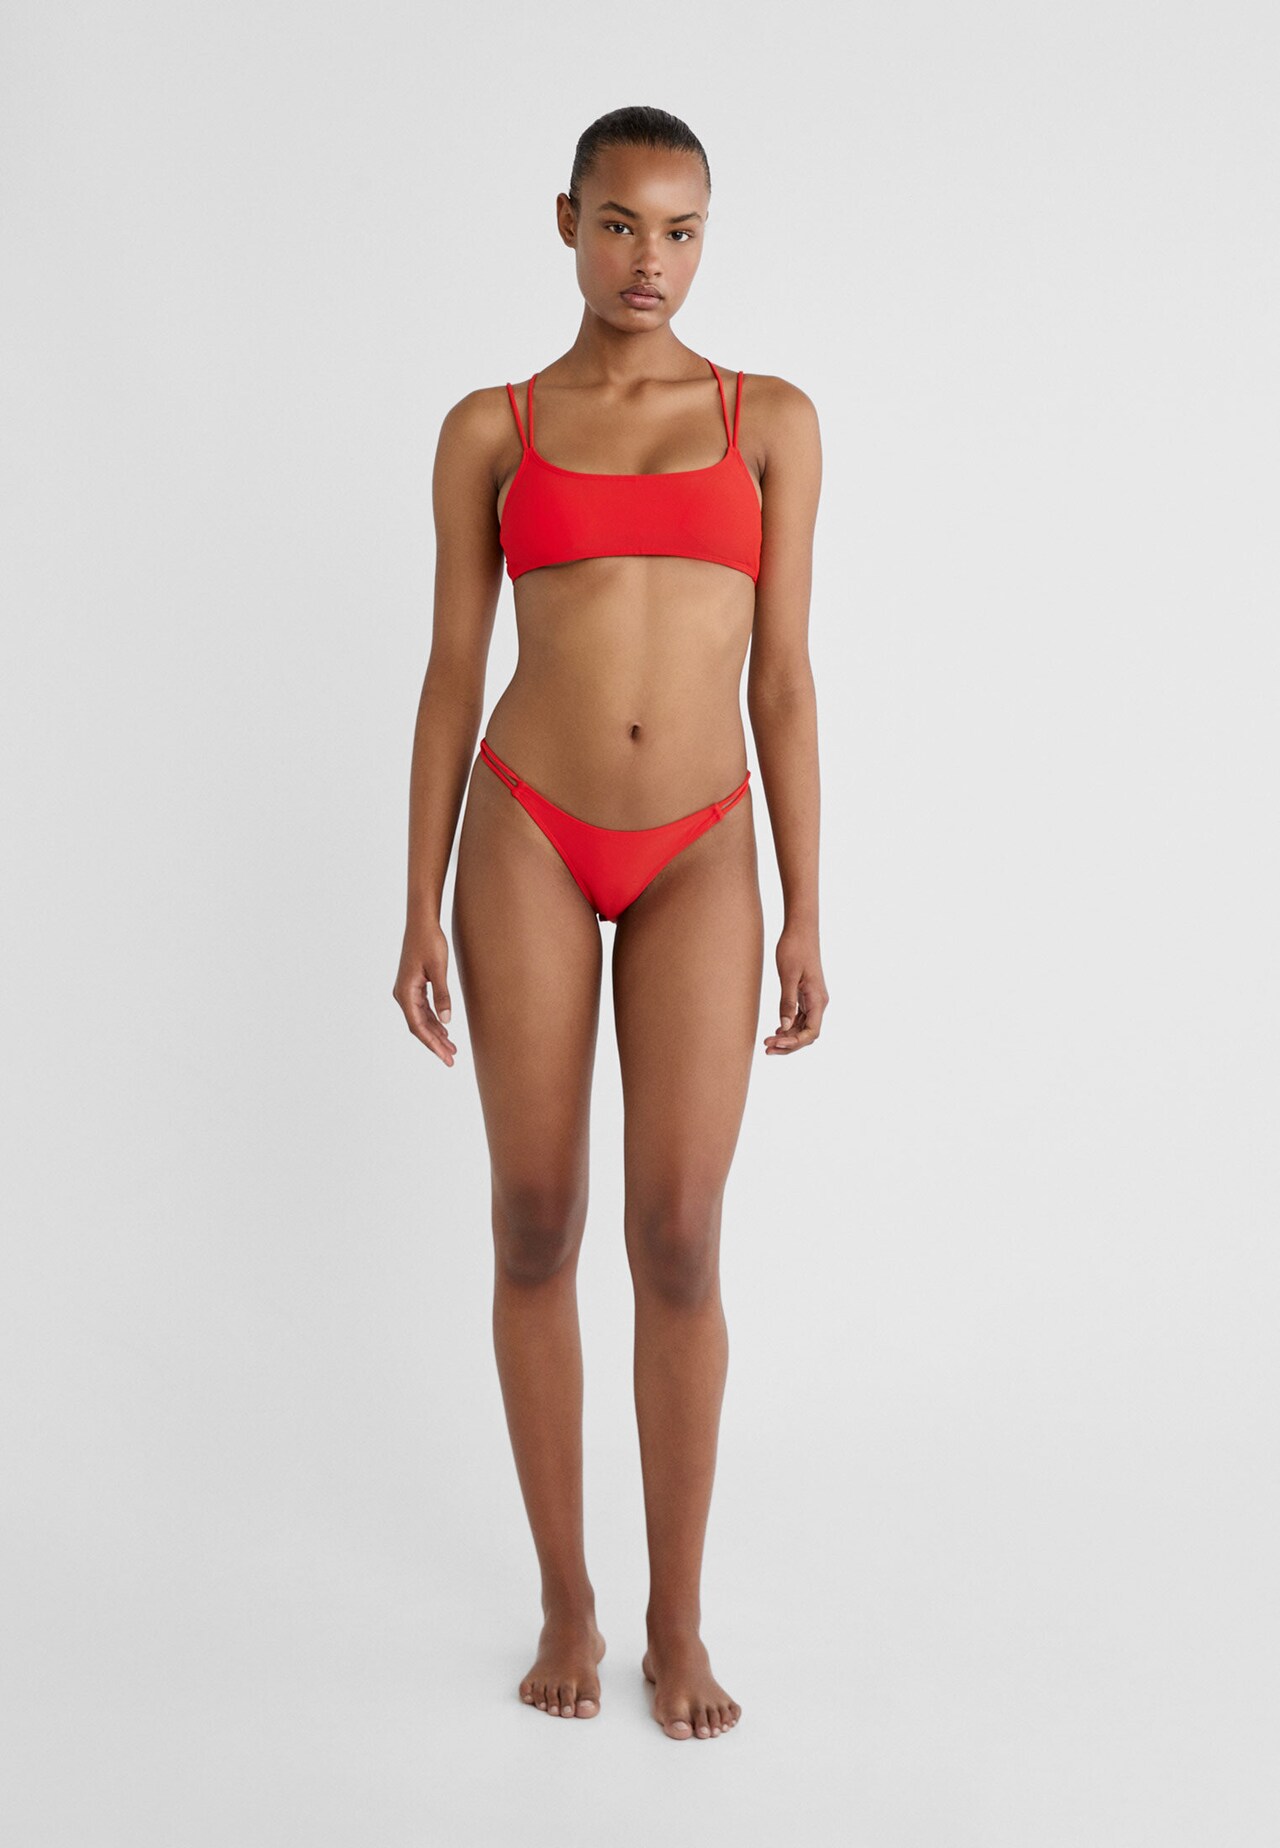 Bikini top with crossover straps at the back - Women's fashion